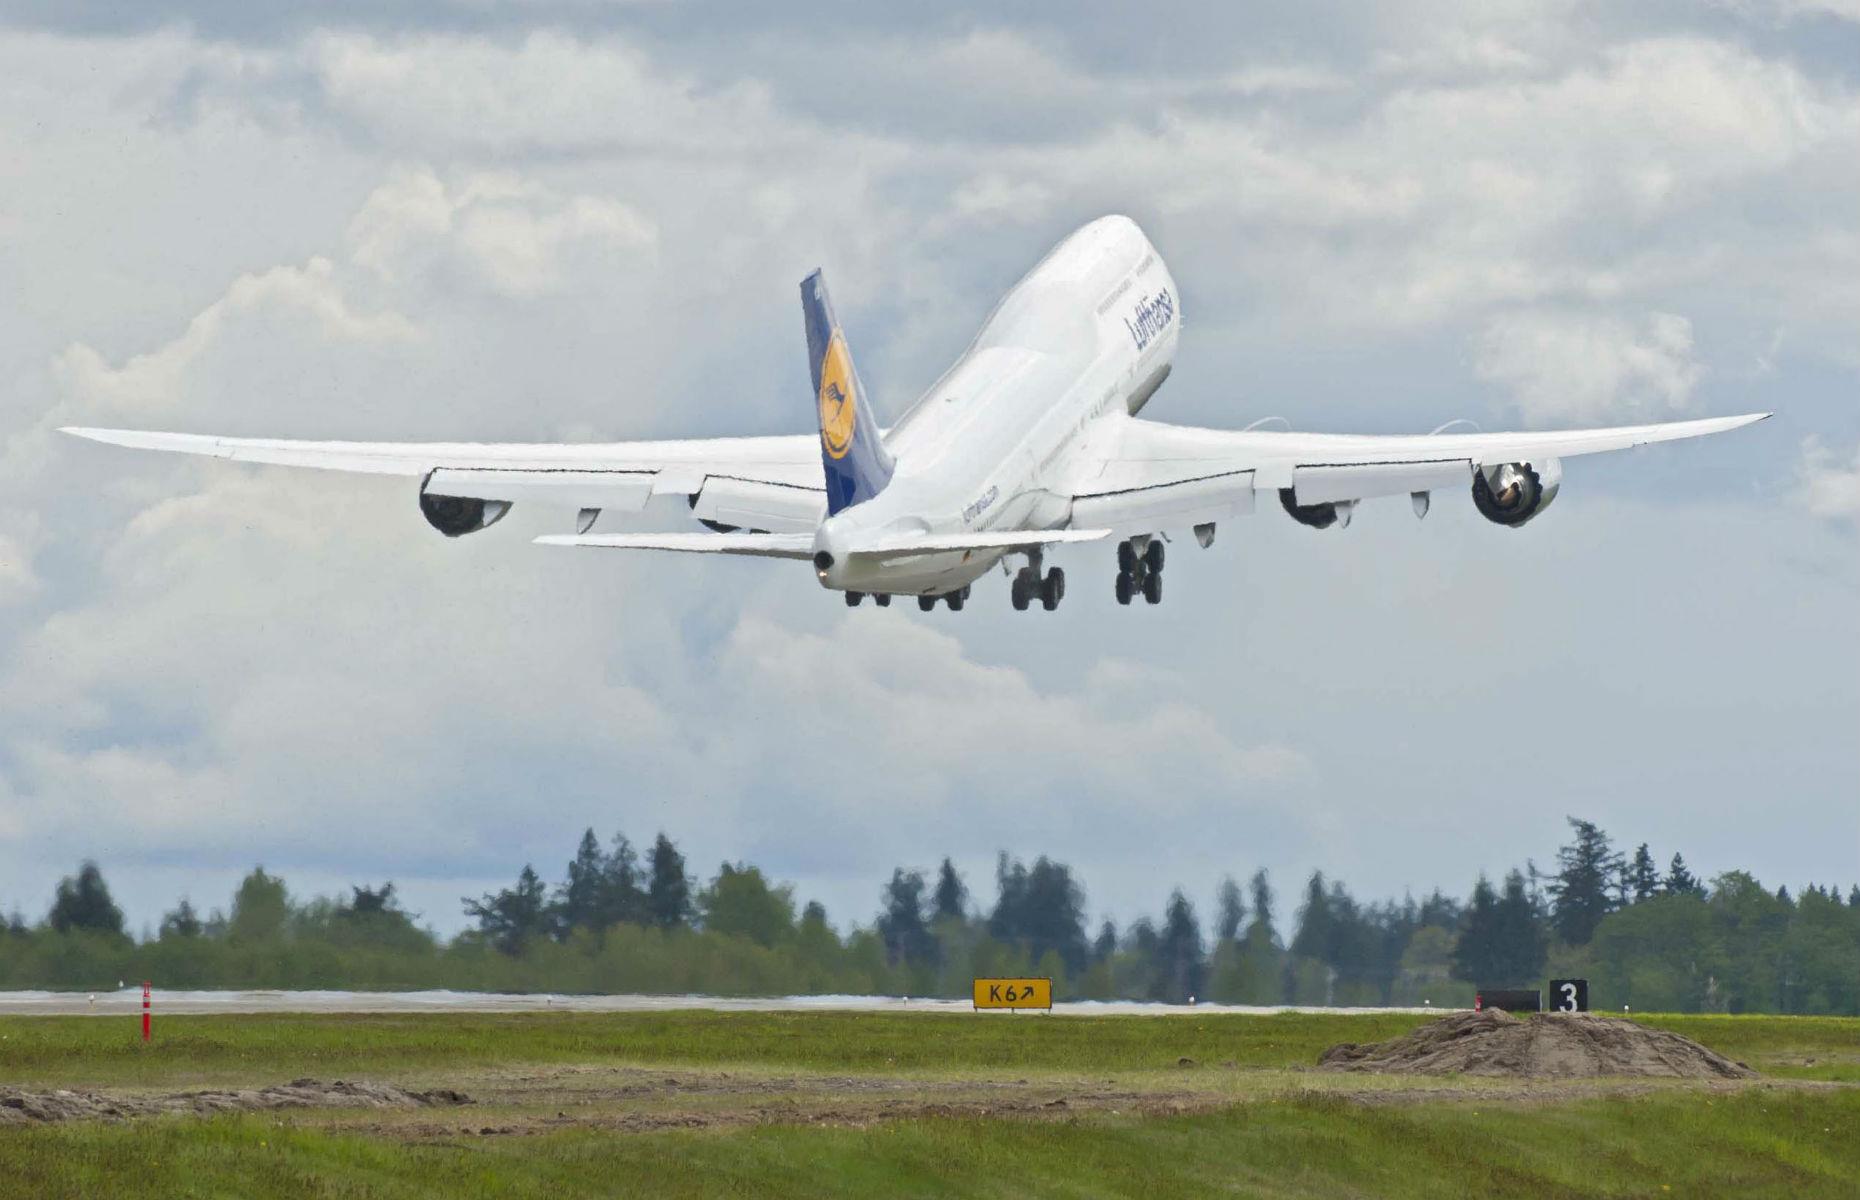 <p>The aircraft isn’t just long – it’s tall too. Its tail, at over 63 feet (19m) high, is the same height as an average six-story building. Dubbed ‘the Queen of the Skies’, the 747 series has seen 1,574 aircraft purchased by more than 100 companies and airlines, logging more than 118 million flight hours and nearly 23 million flight cycles.</p>